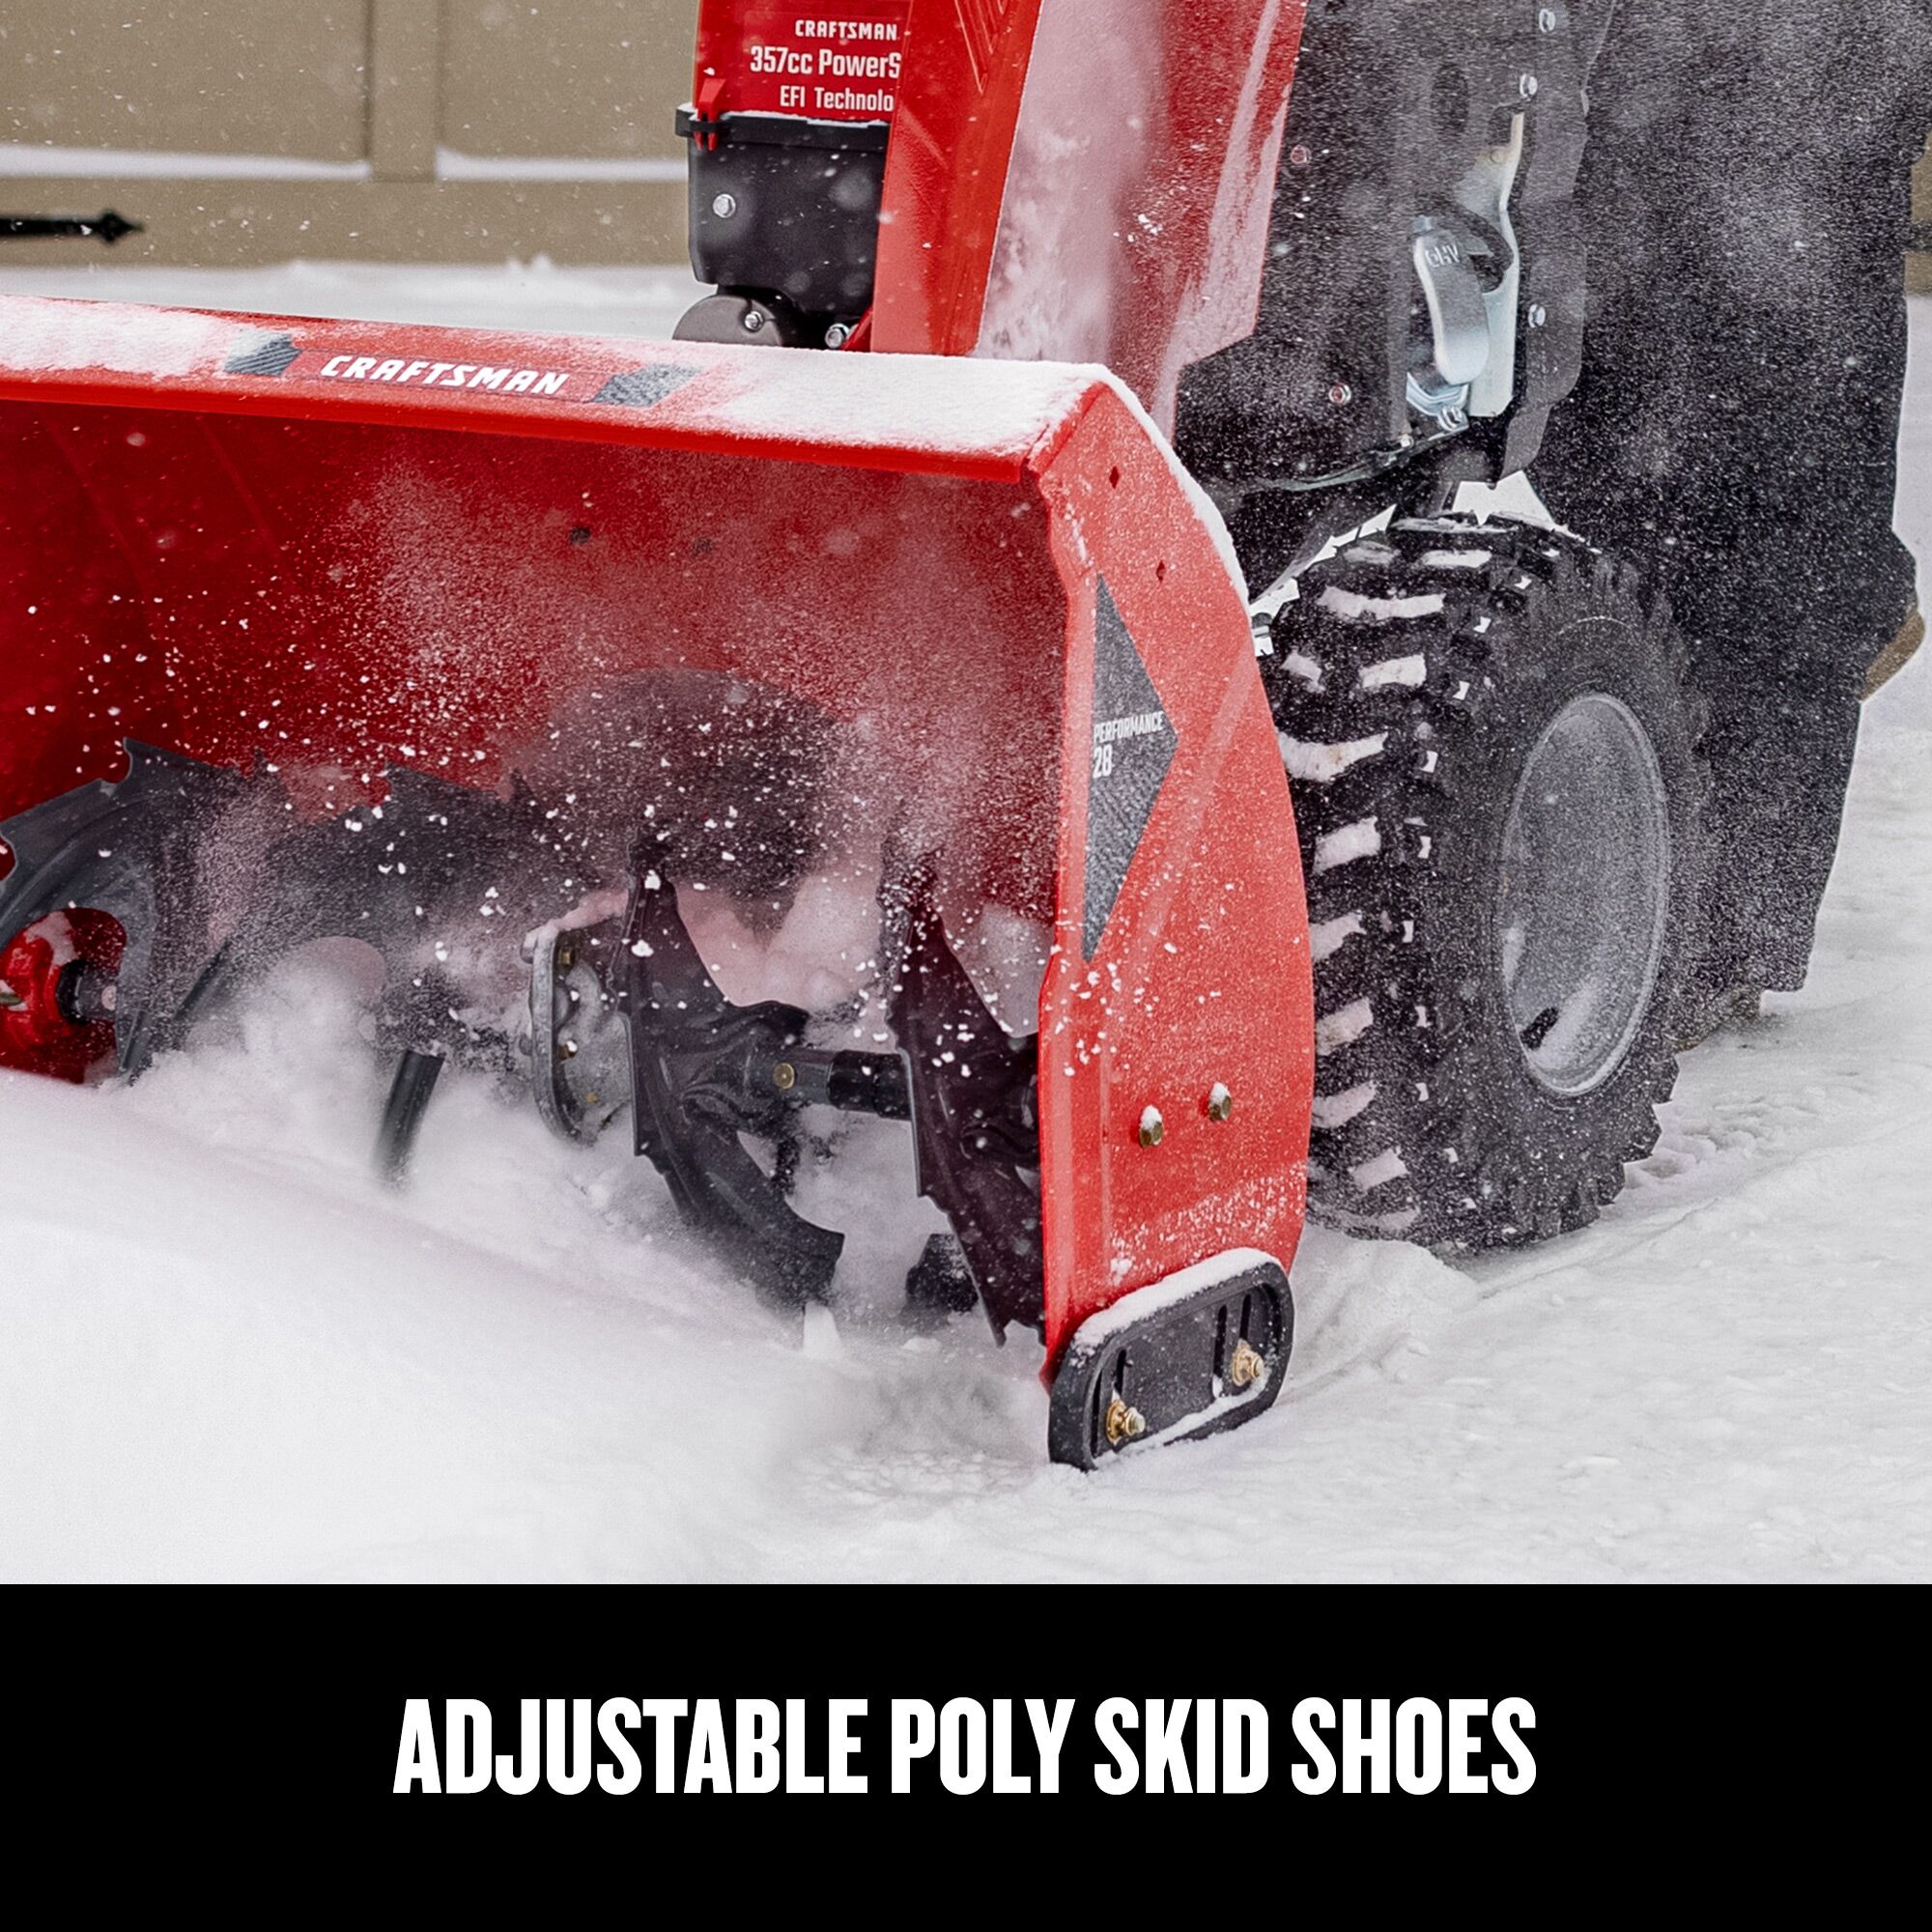 CRAFTSMAN 28-in. 357-cc Two-Stage Gas Snow Blower focused in on polyskid shoes